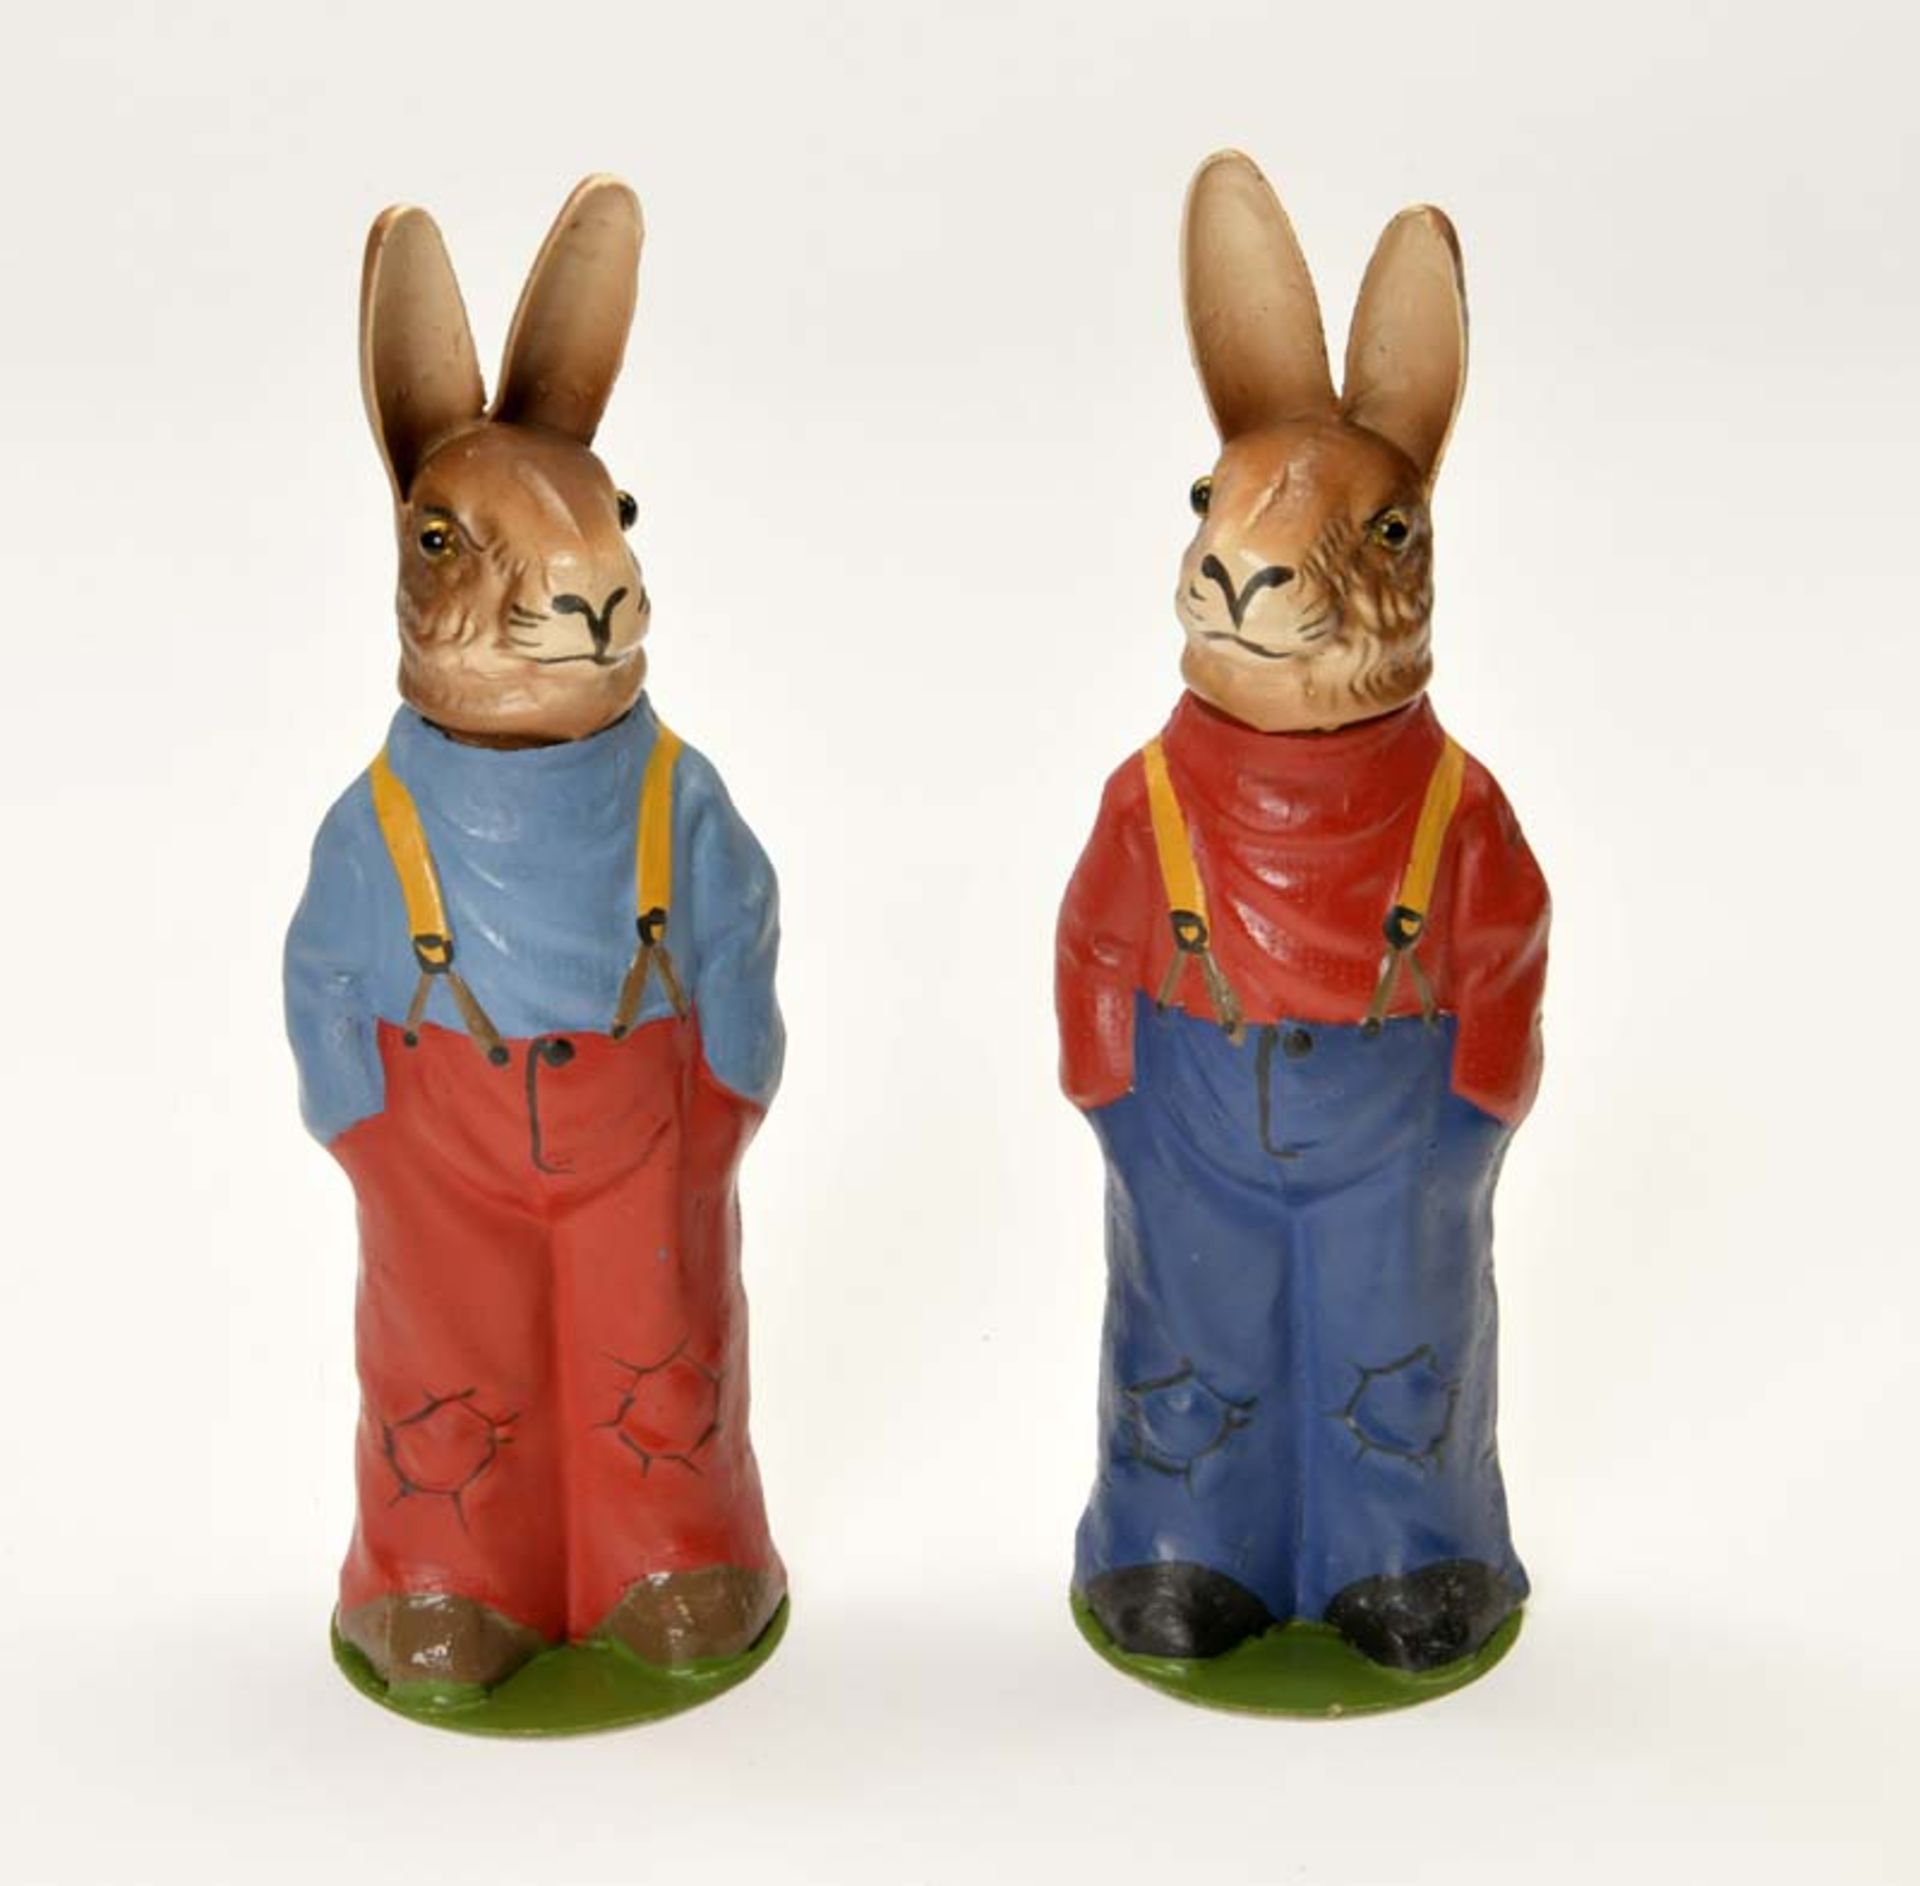 Erzgebirge, 2 Rabbits as Candy Container, Germany, paper machee, C 1